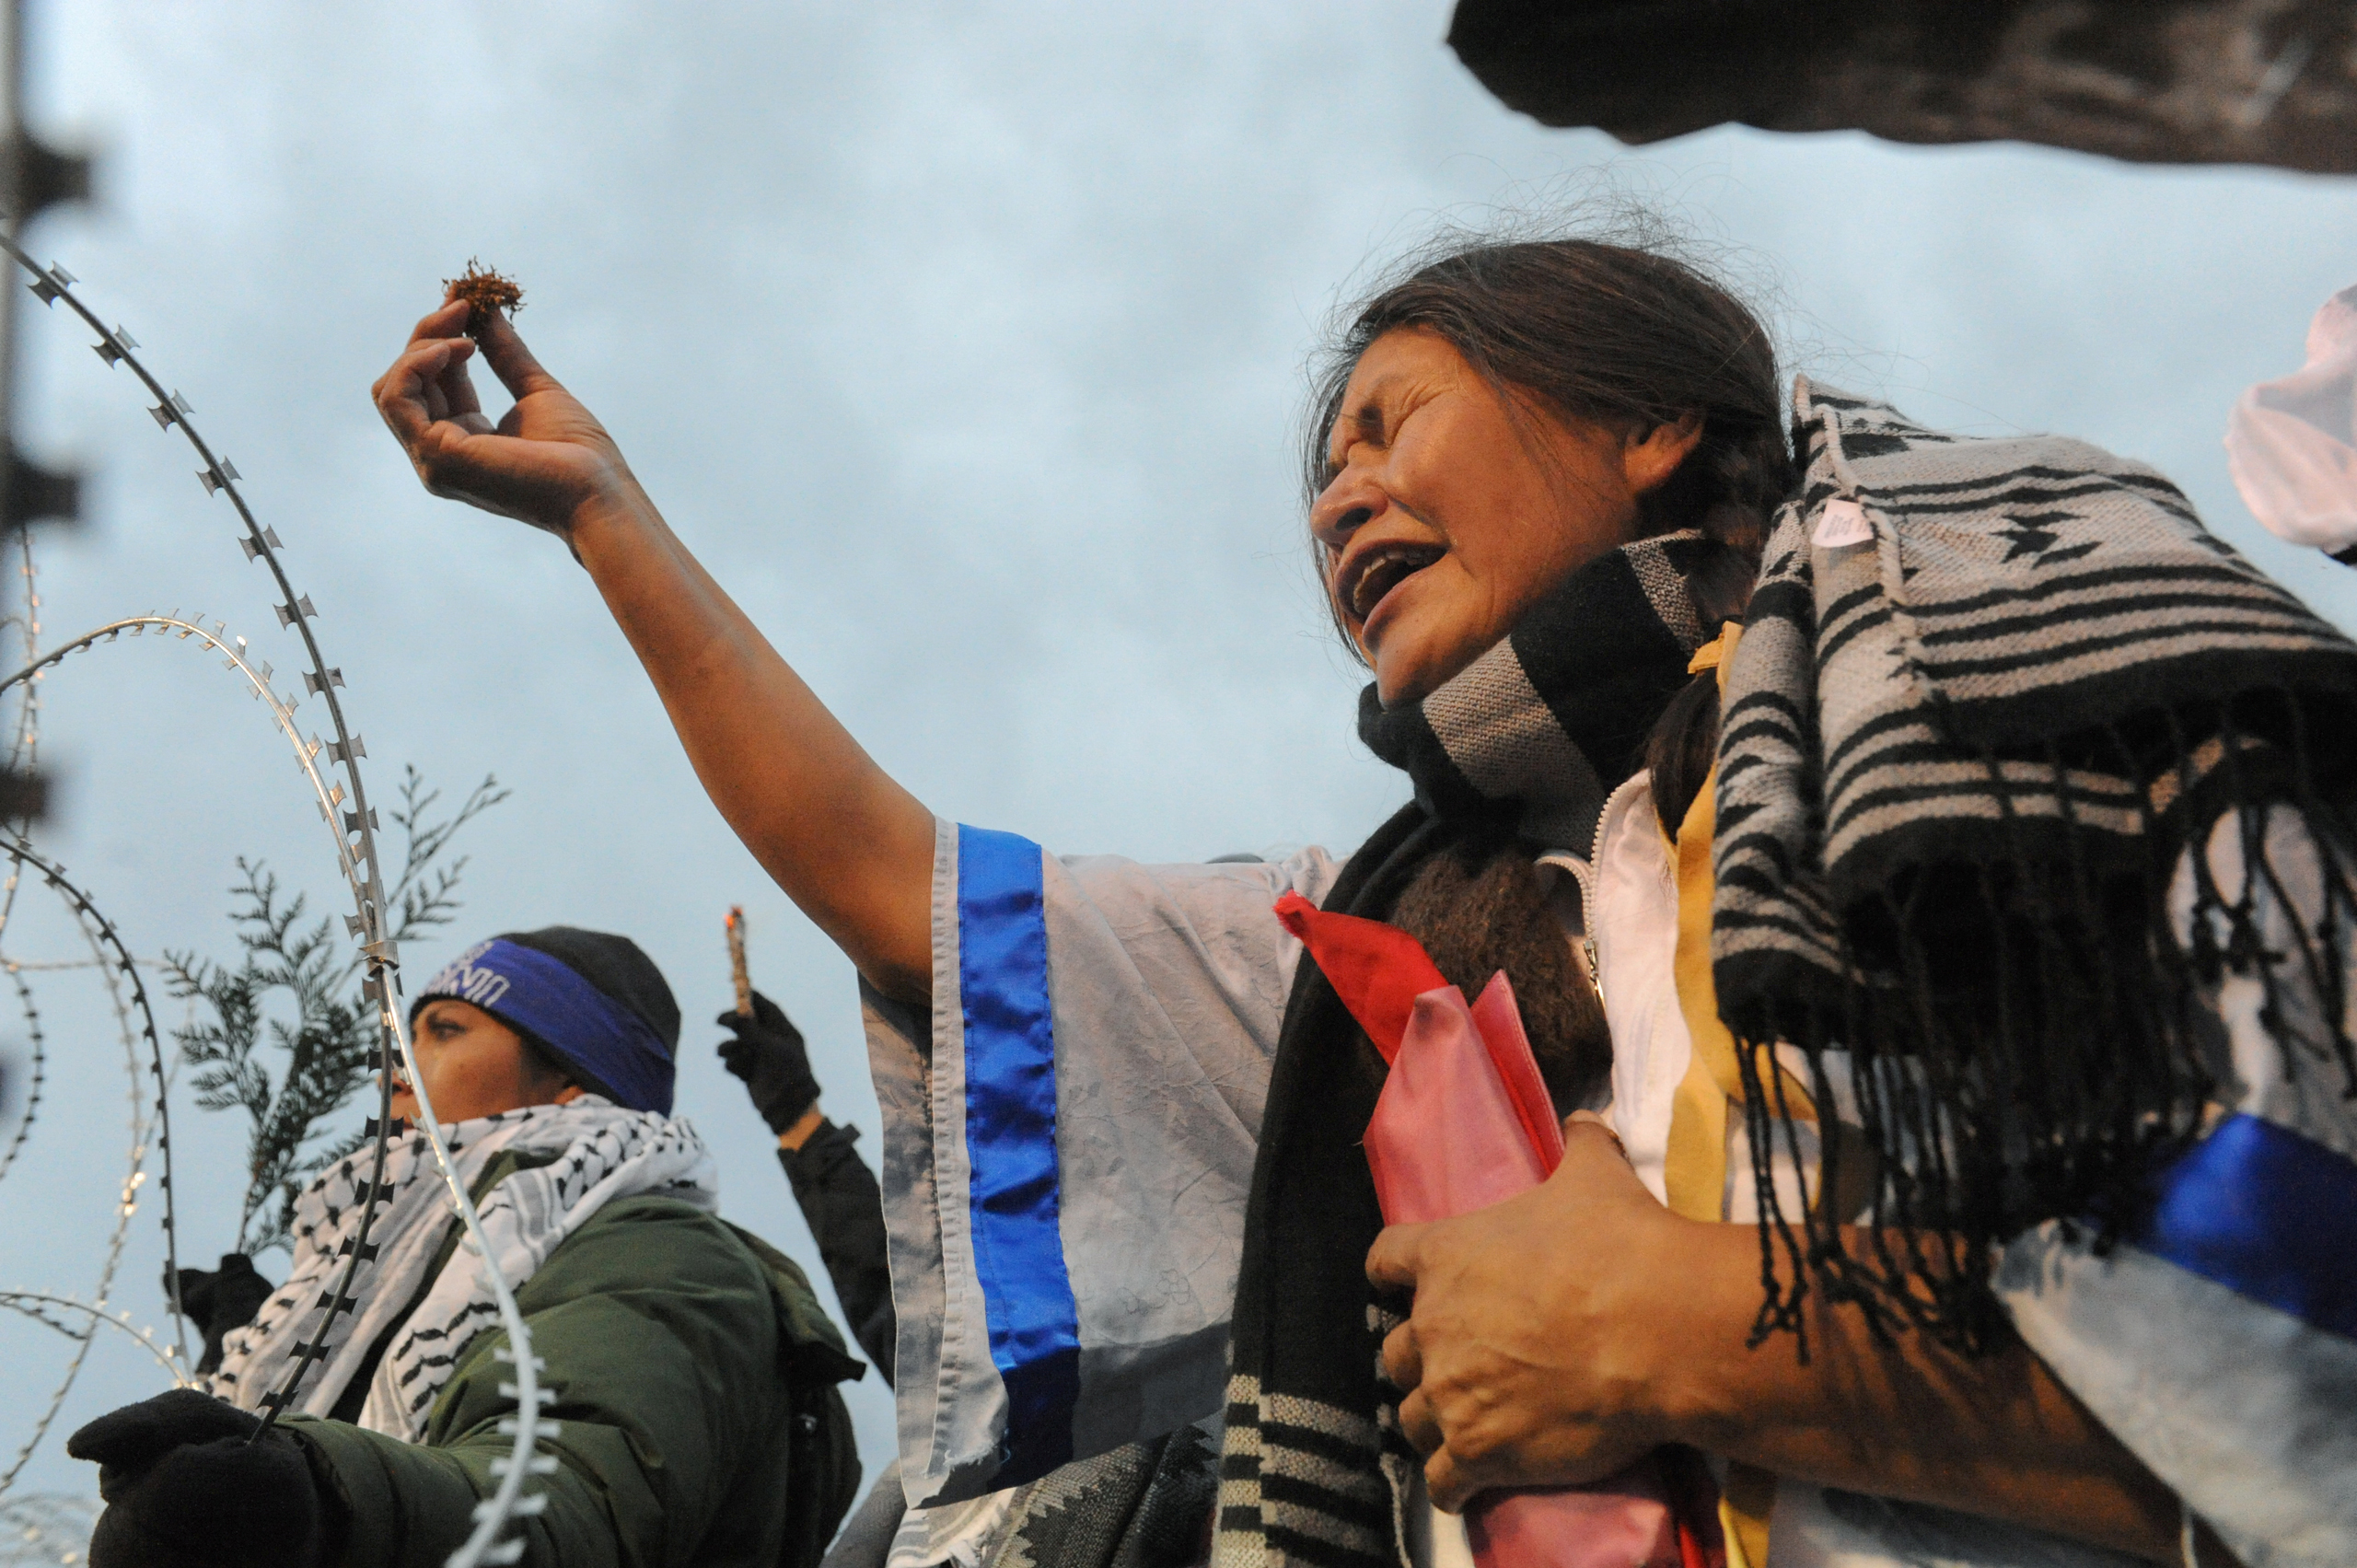 Cheryl Angel offers ceremonial tobacco on Backwater Bridge during a protest against plans to pass the Dakota Access pipeline near the Standing Rock Indian Reservation, near Cannon Ball, North Dakota